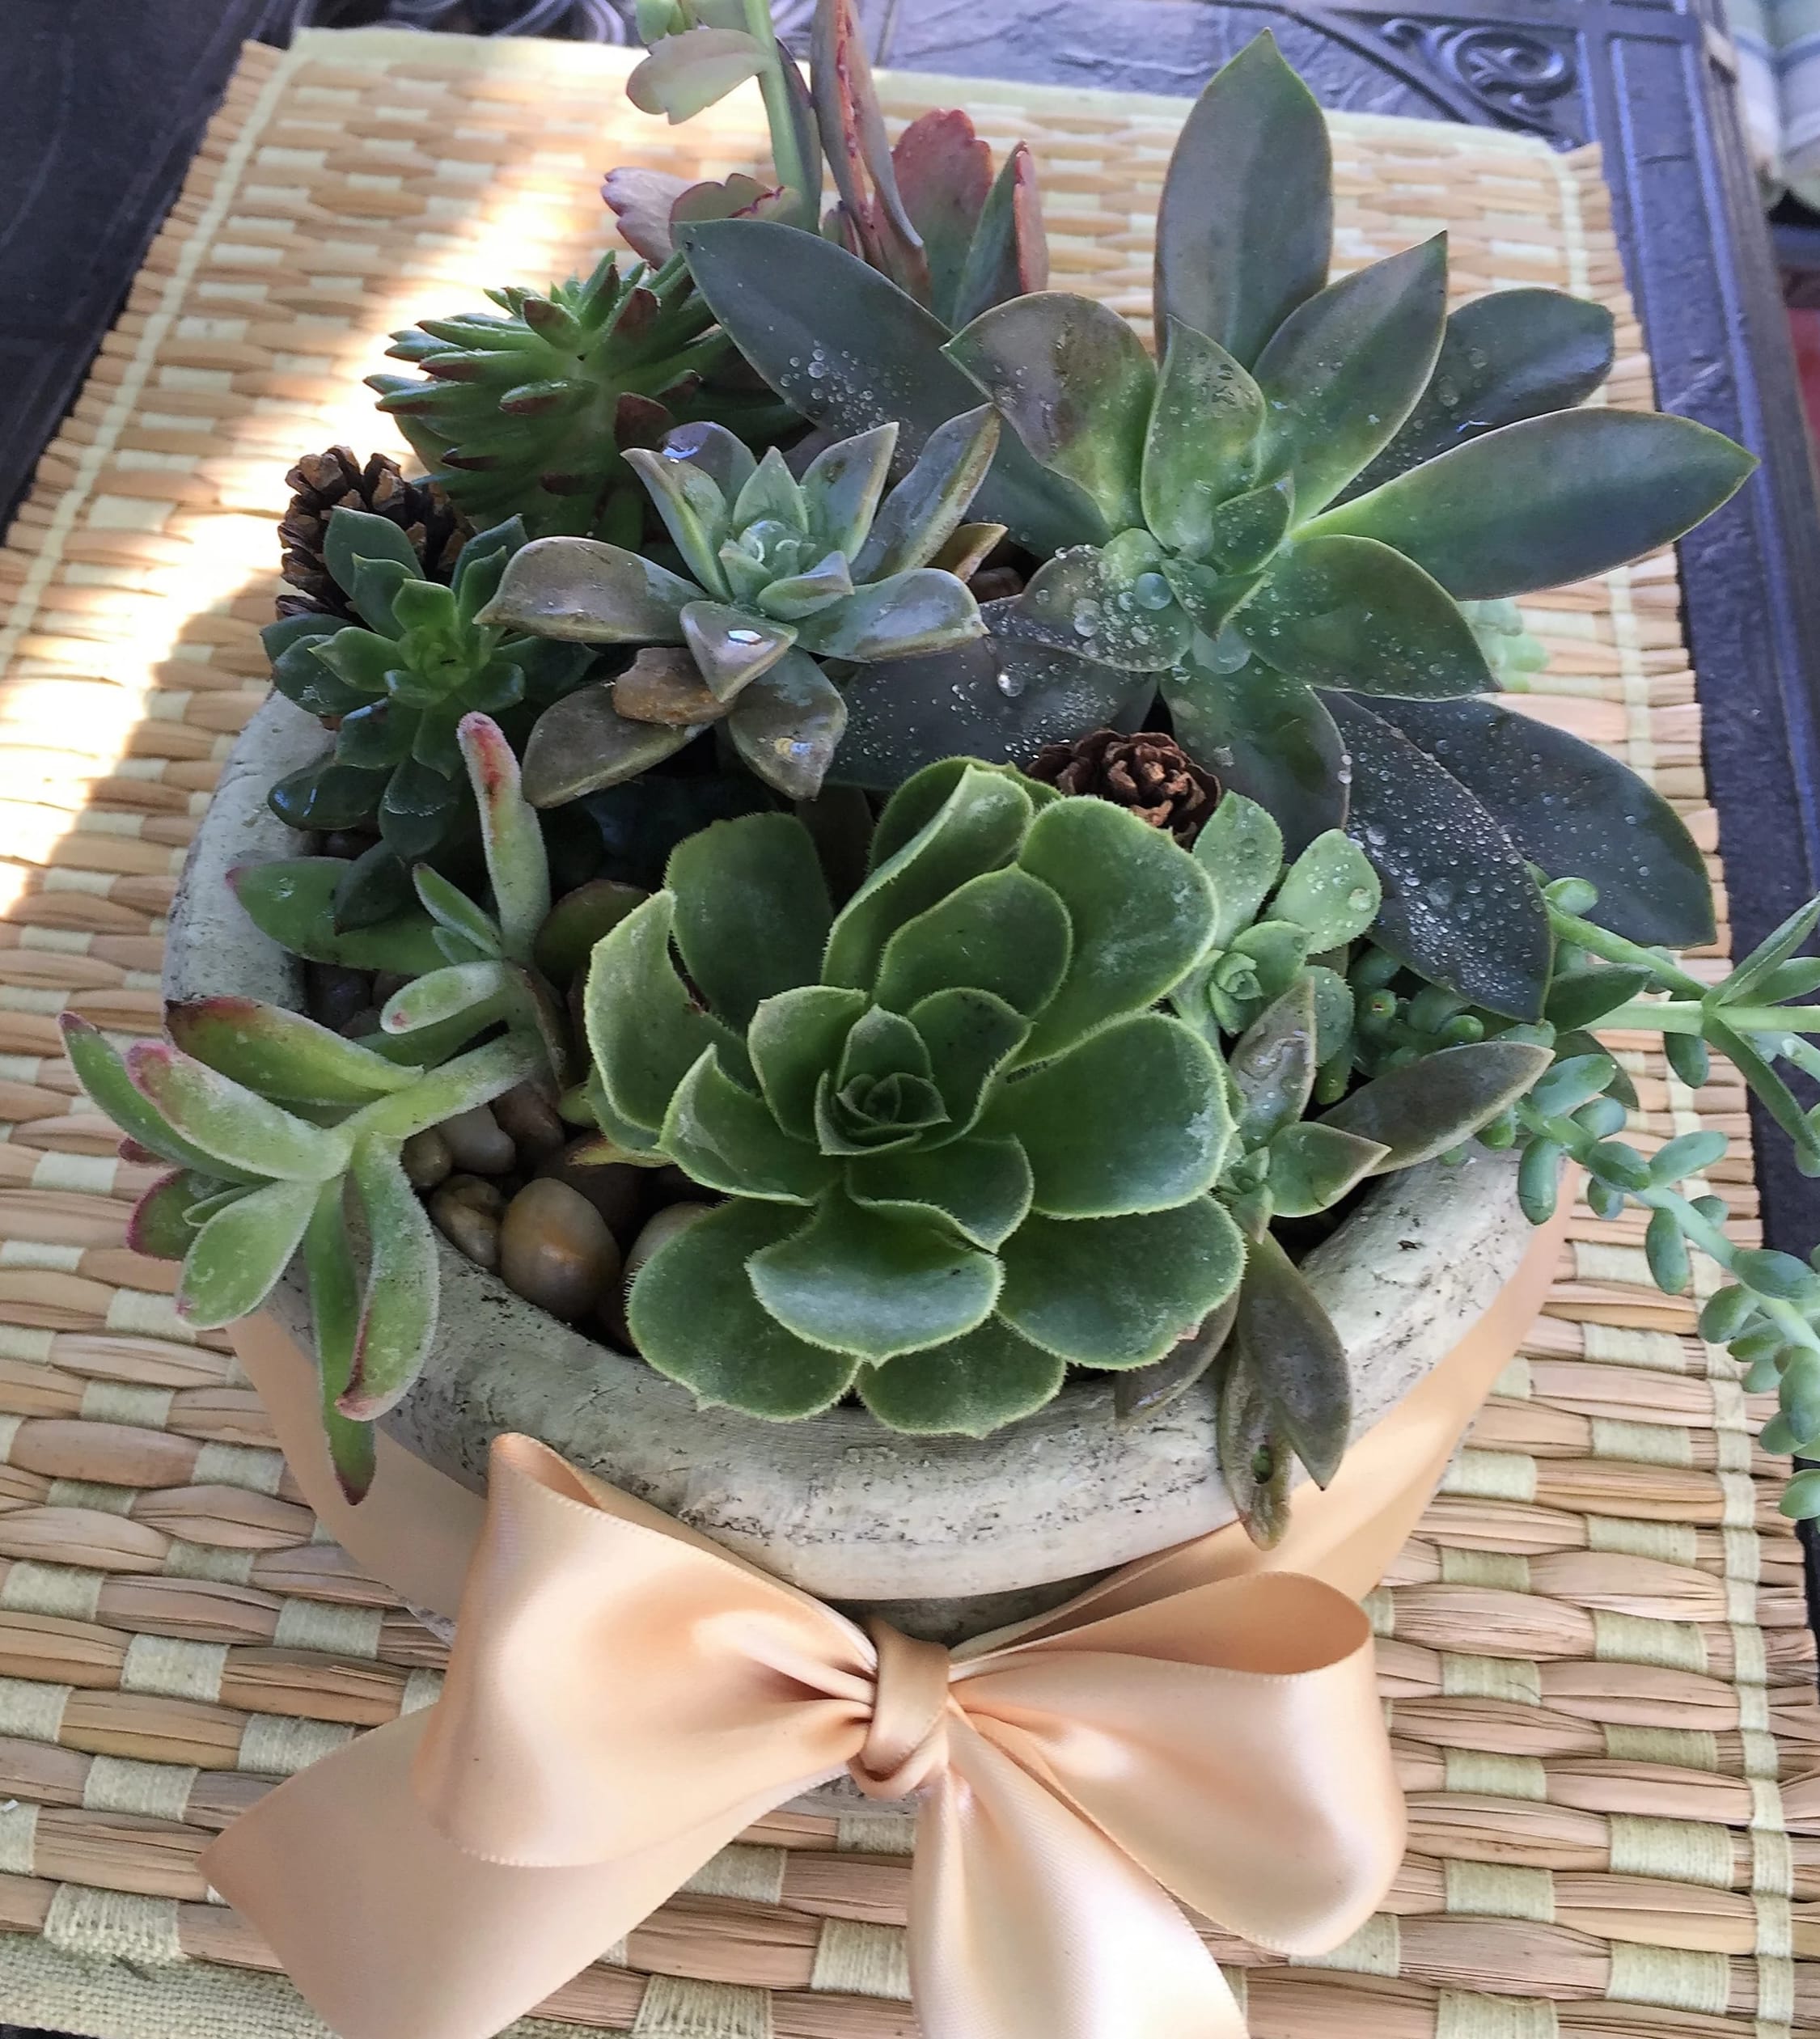 Succulent Planter - An eye-catching collection of up to 10 different potted succulents displayed together in a ceramic container. This one is very easy to care for.